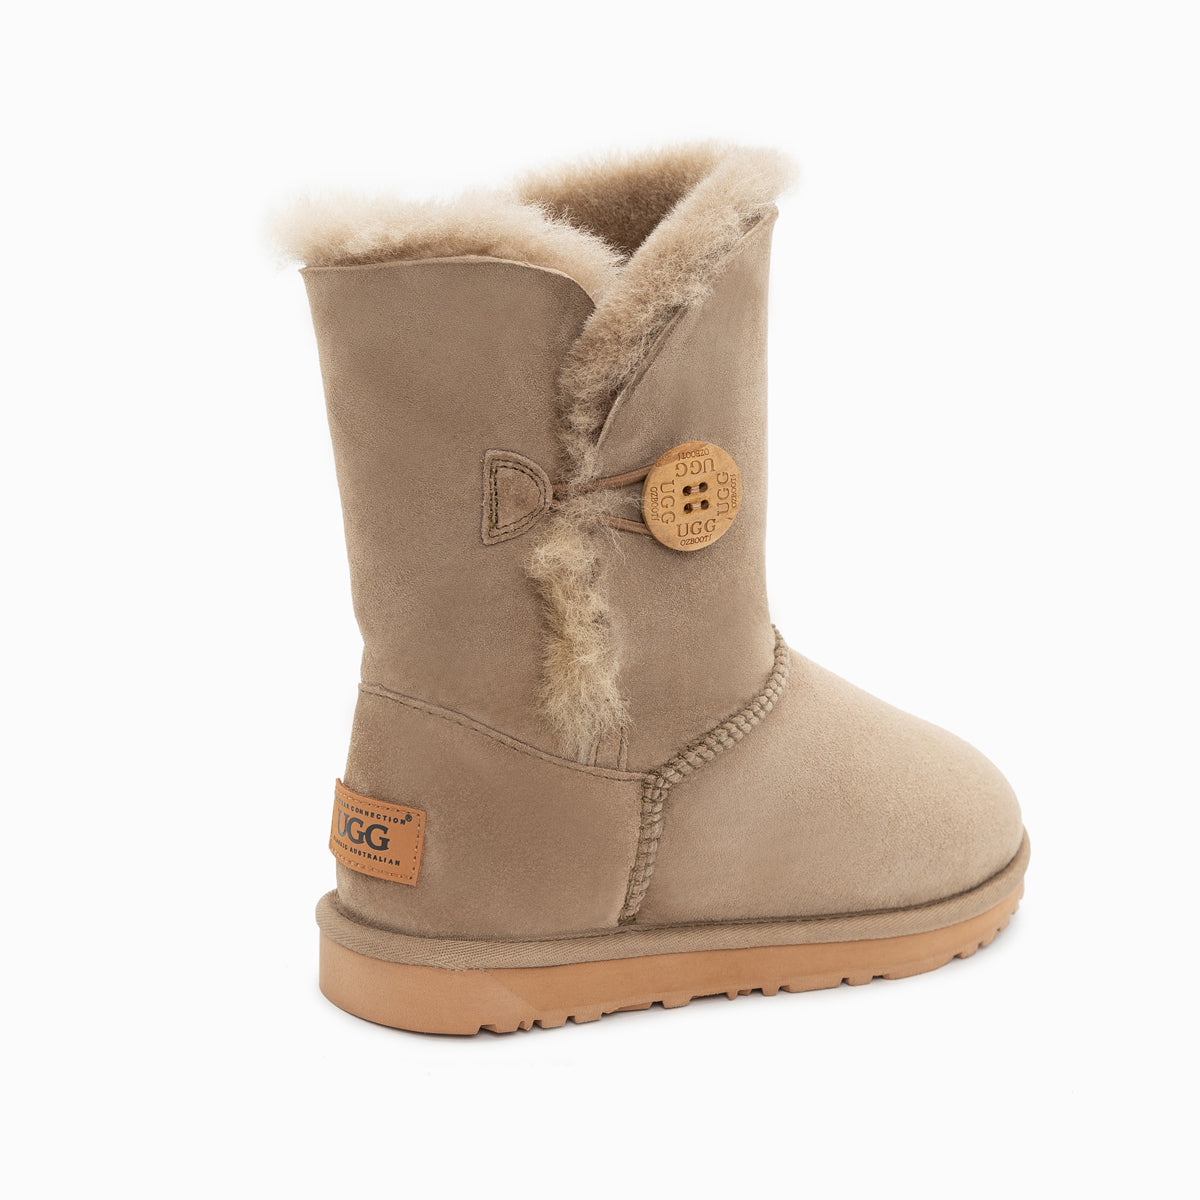 Ugg Classic Short Button Boots (Water Resistant)-Boots-PEROZ Accessories